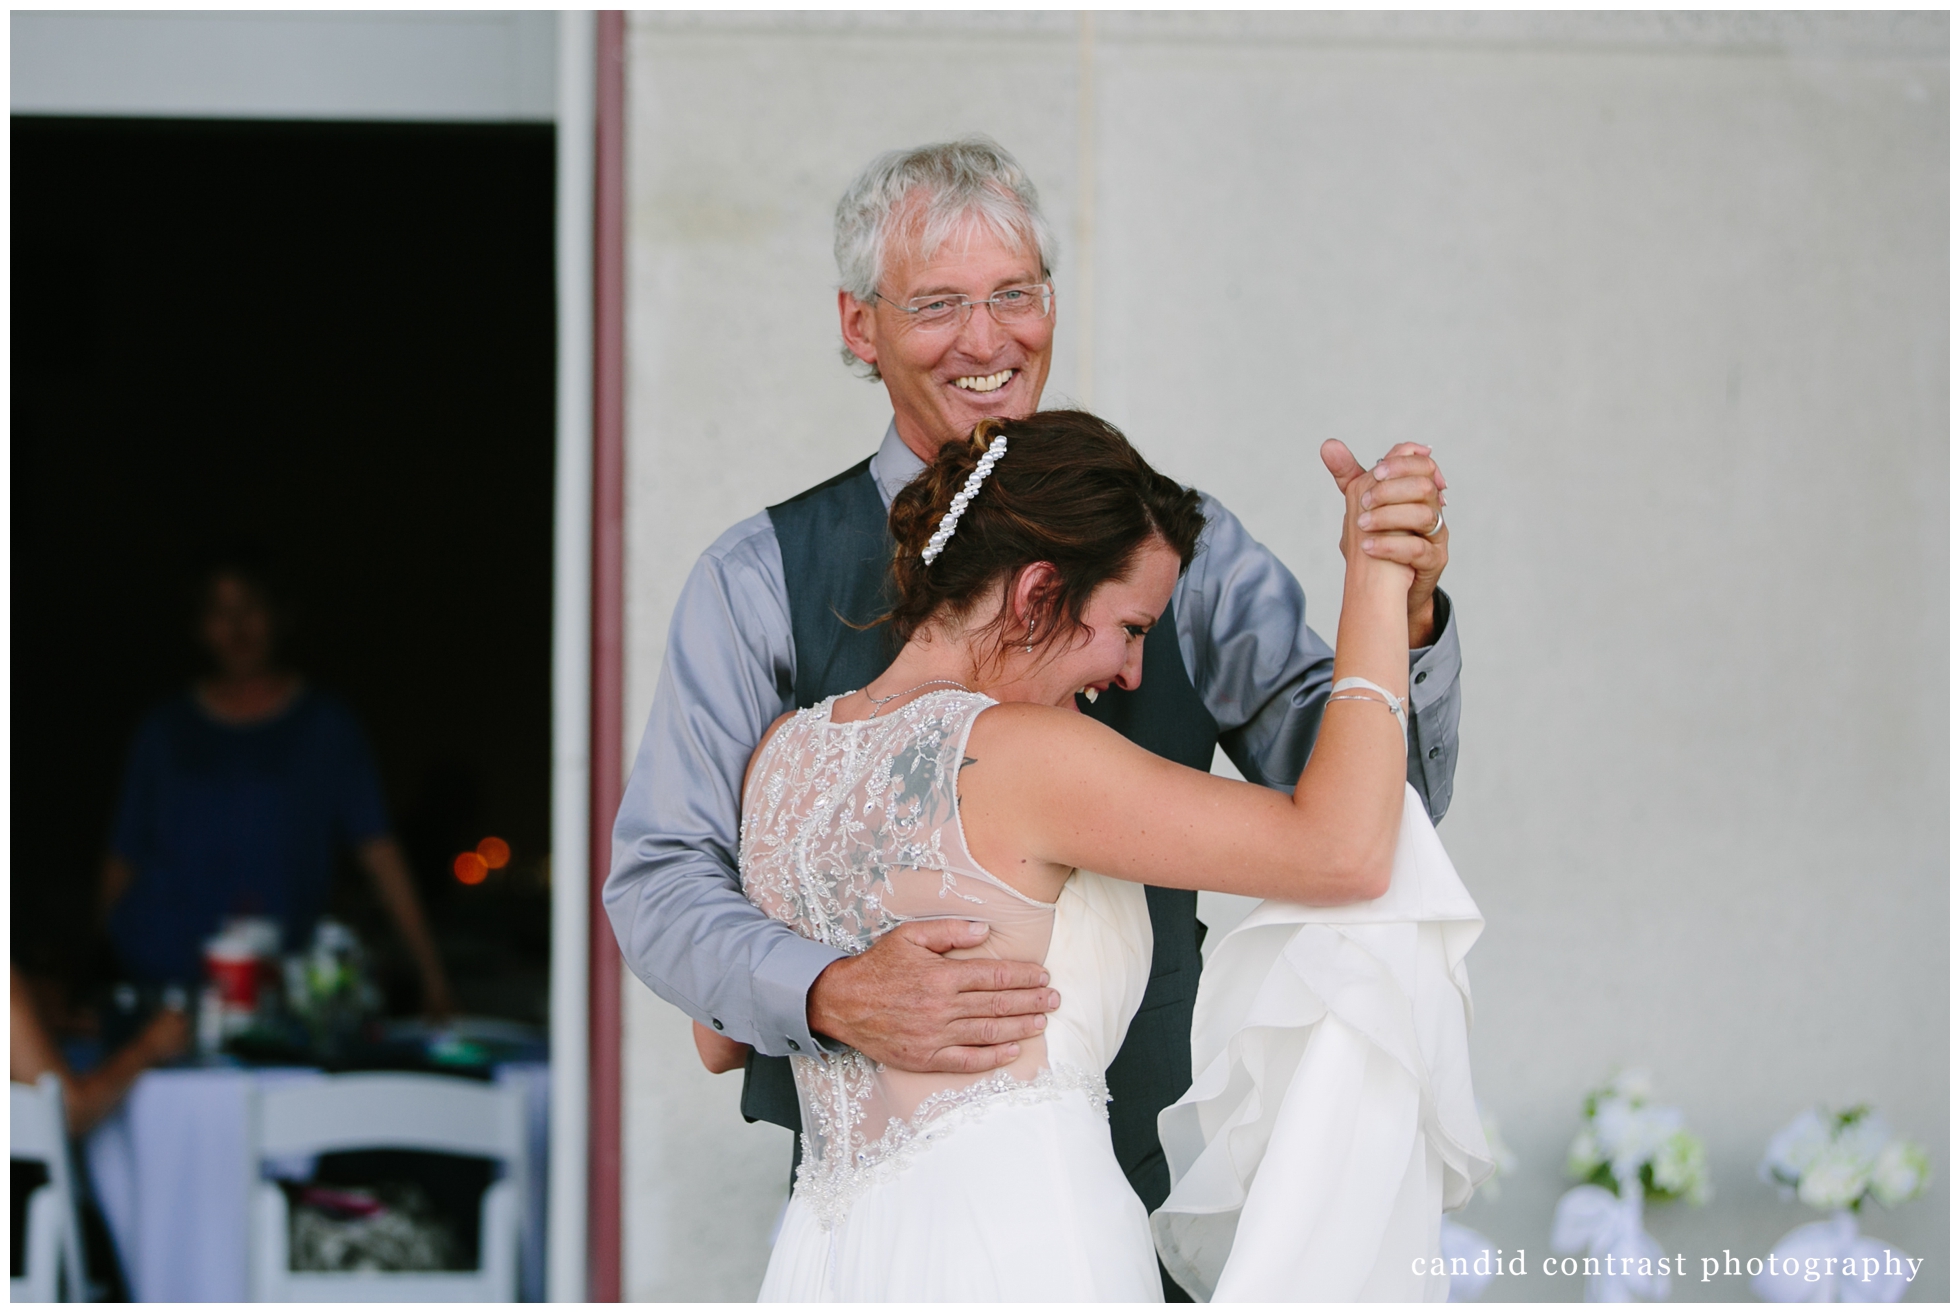 father daughter dance at a bellevue iowa outdoor wedding at the shore event center, iowa wedding photographer candid contrast photography